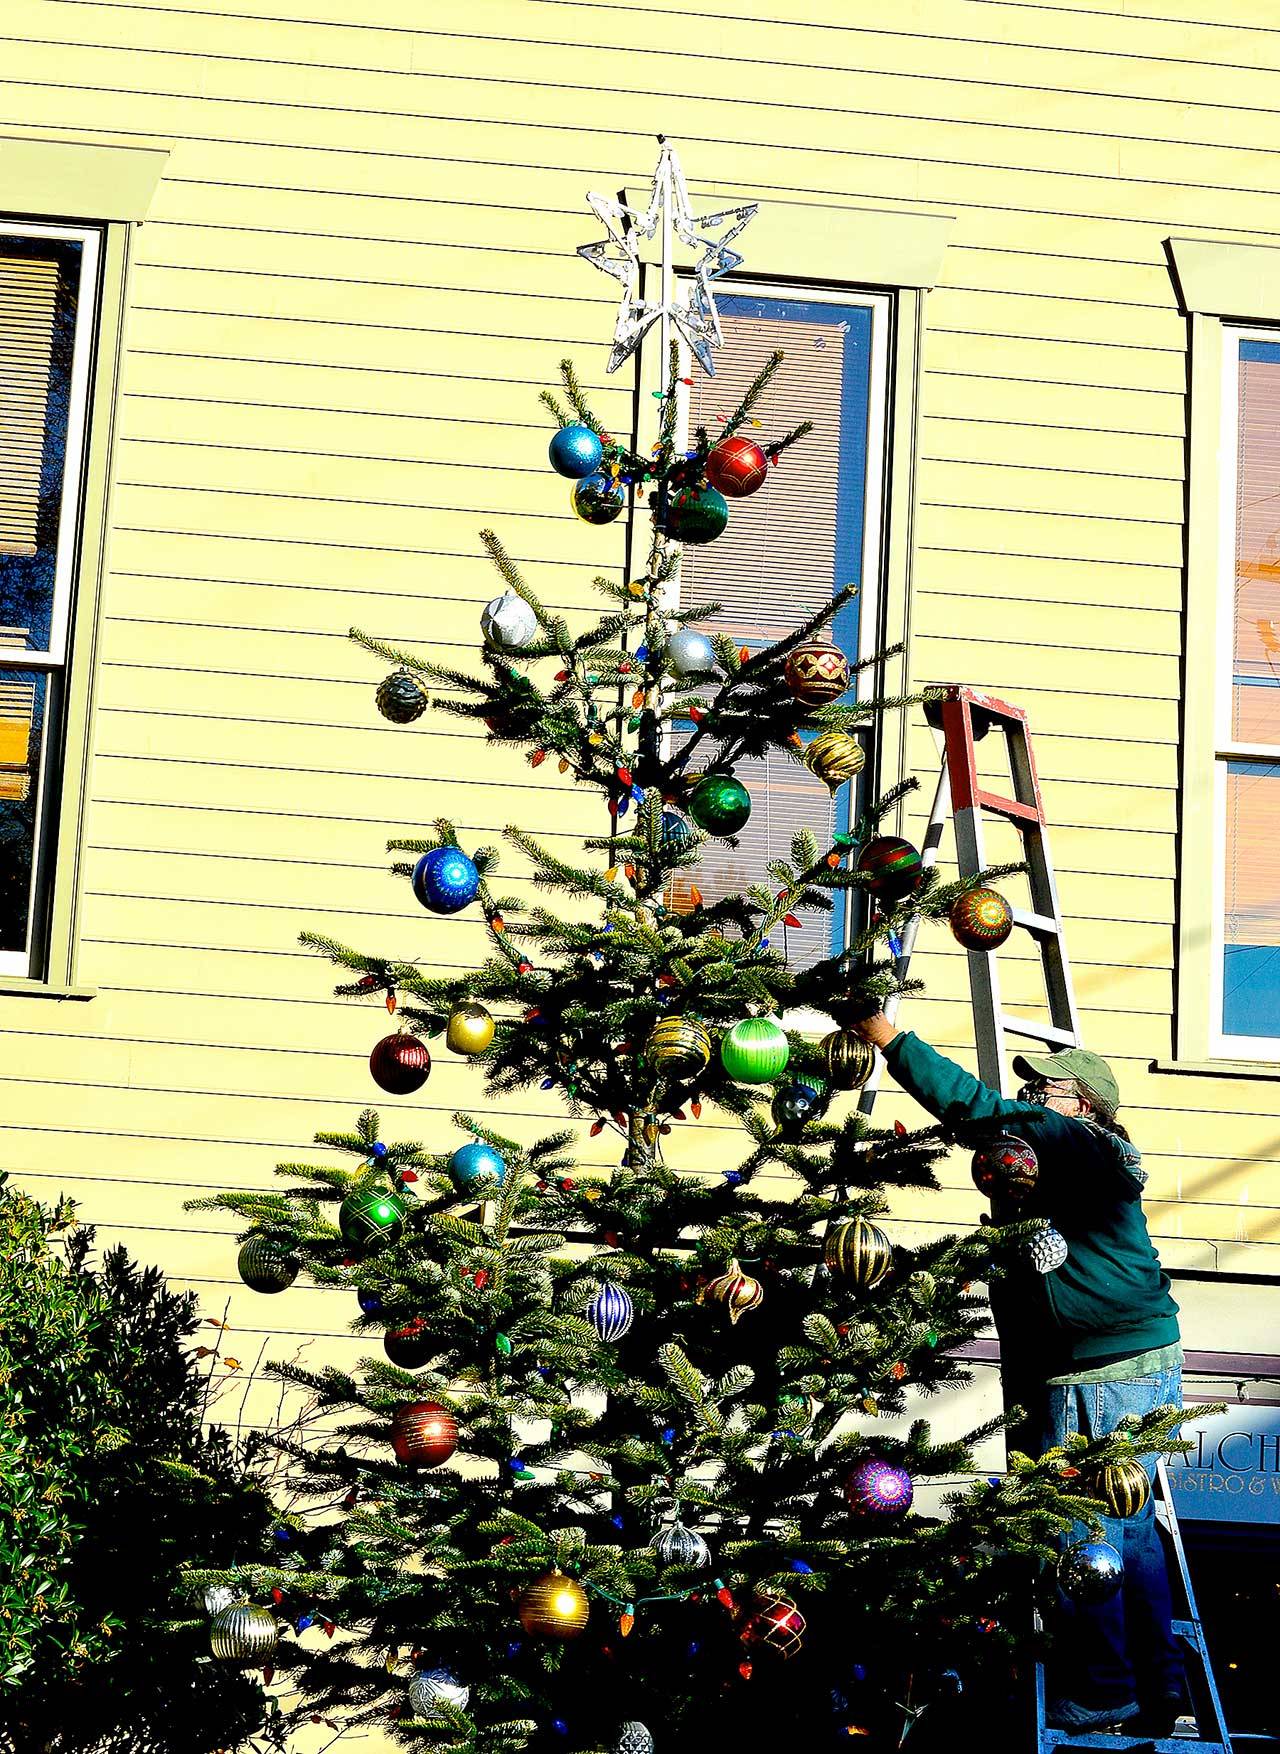 Downtown Port Townsend’s 16-foot Nordman fir got its ornaments, courtesy of longtime Main Street decorator Michael Rosser, in anticipation of the virtual tree lighting around dusk Saturday. The lighting will be shared on the Port Townsend Main Street Program Facebook page. (Diane Urbani de la Paz/Peninsula Daily News)